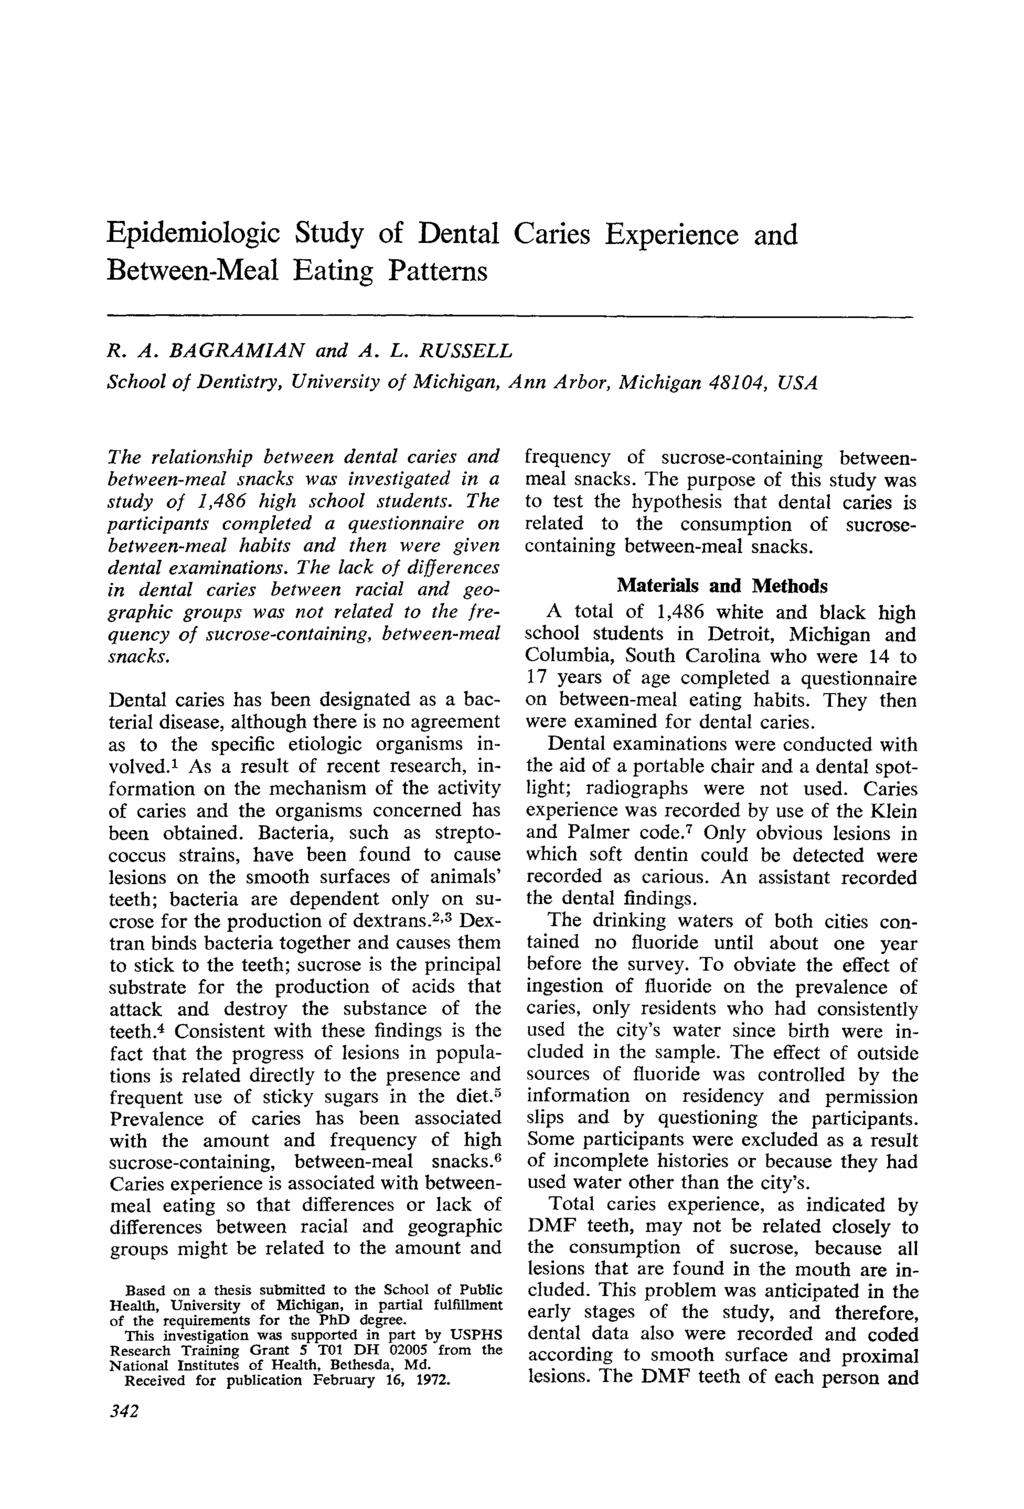 Epidemiologic Study of Dental Caries Experience and Between-Meal Eating Patterns R. A. BAGRAMIAN and A. L.